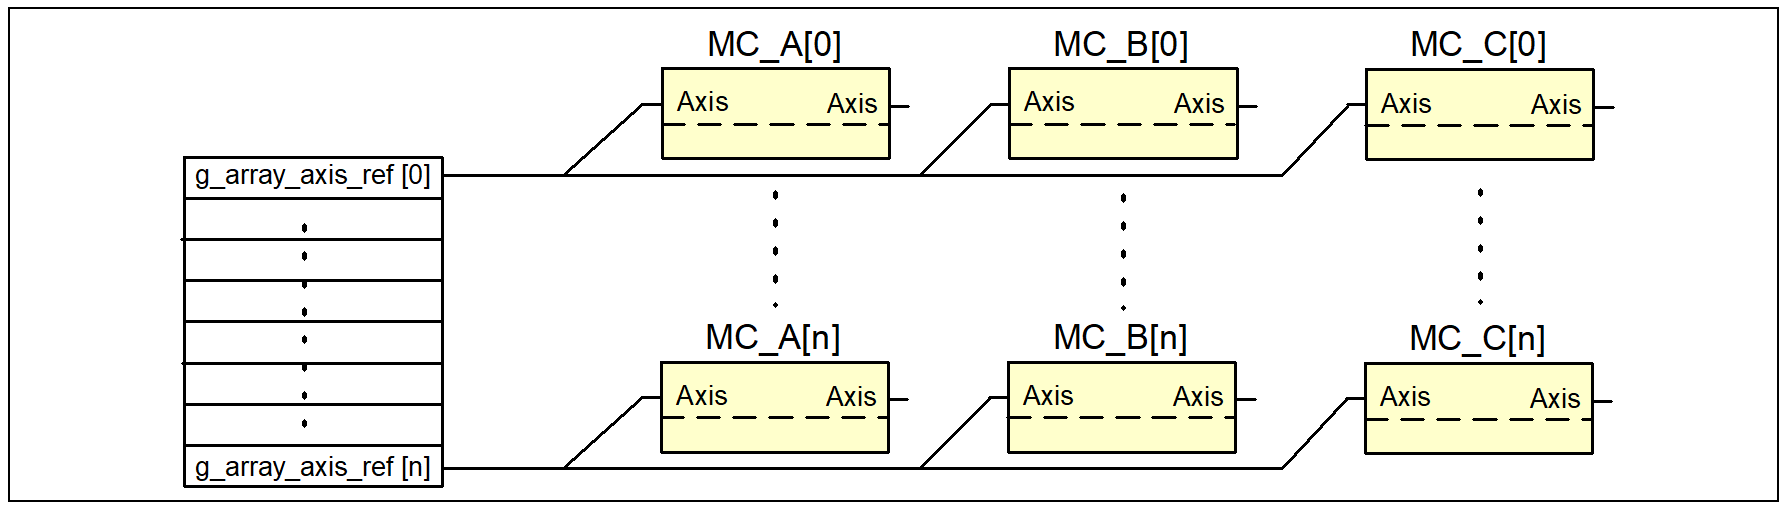 Assigning axis or axis group references to function blocks